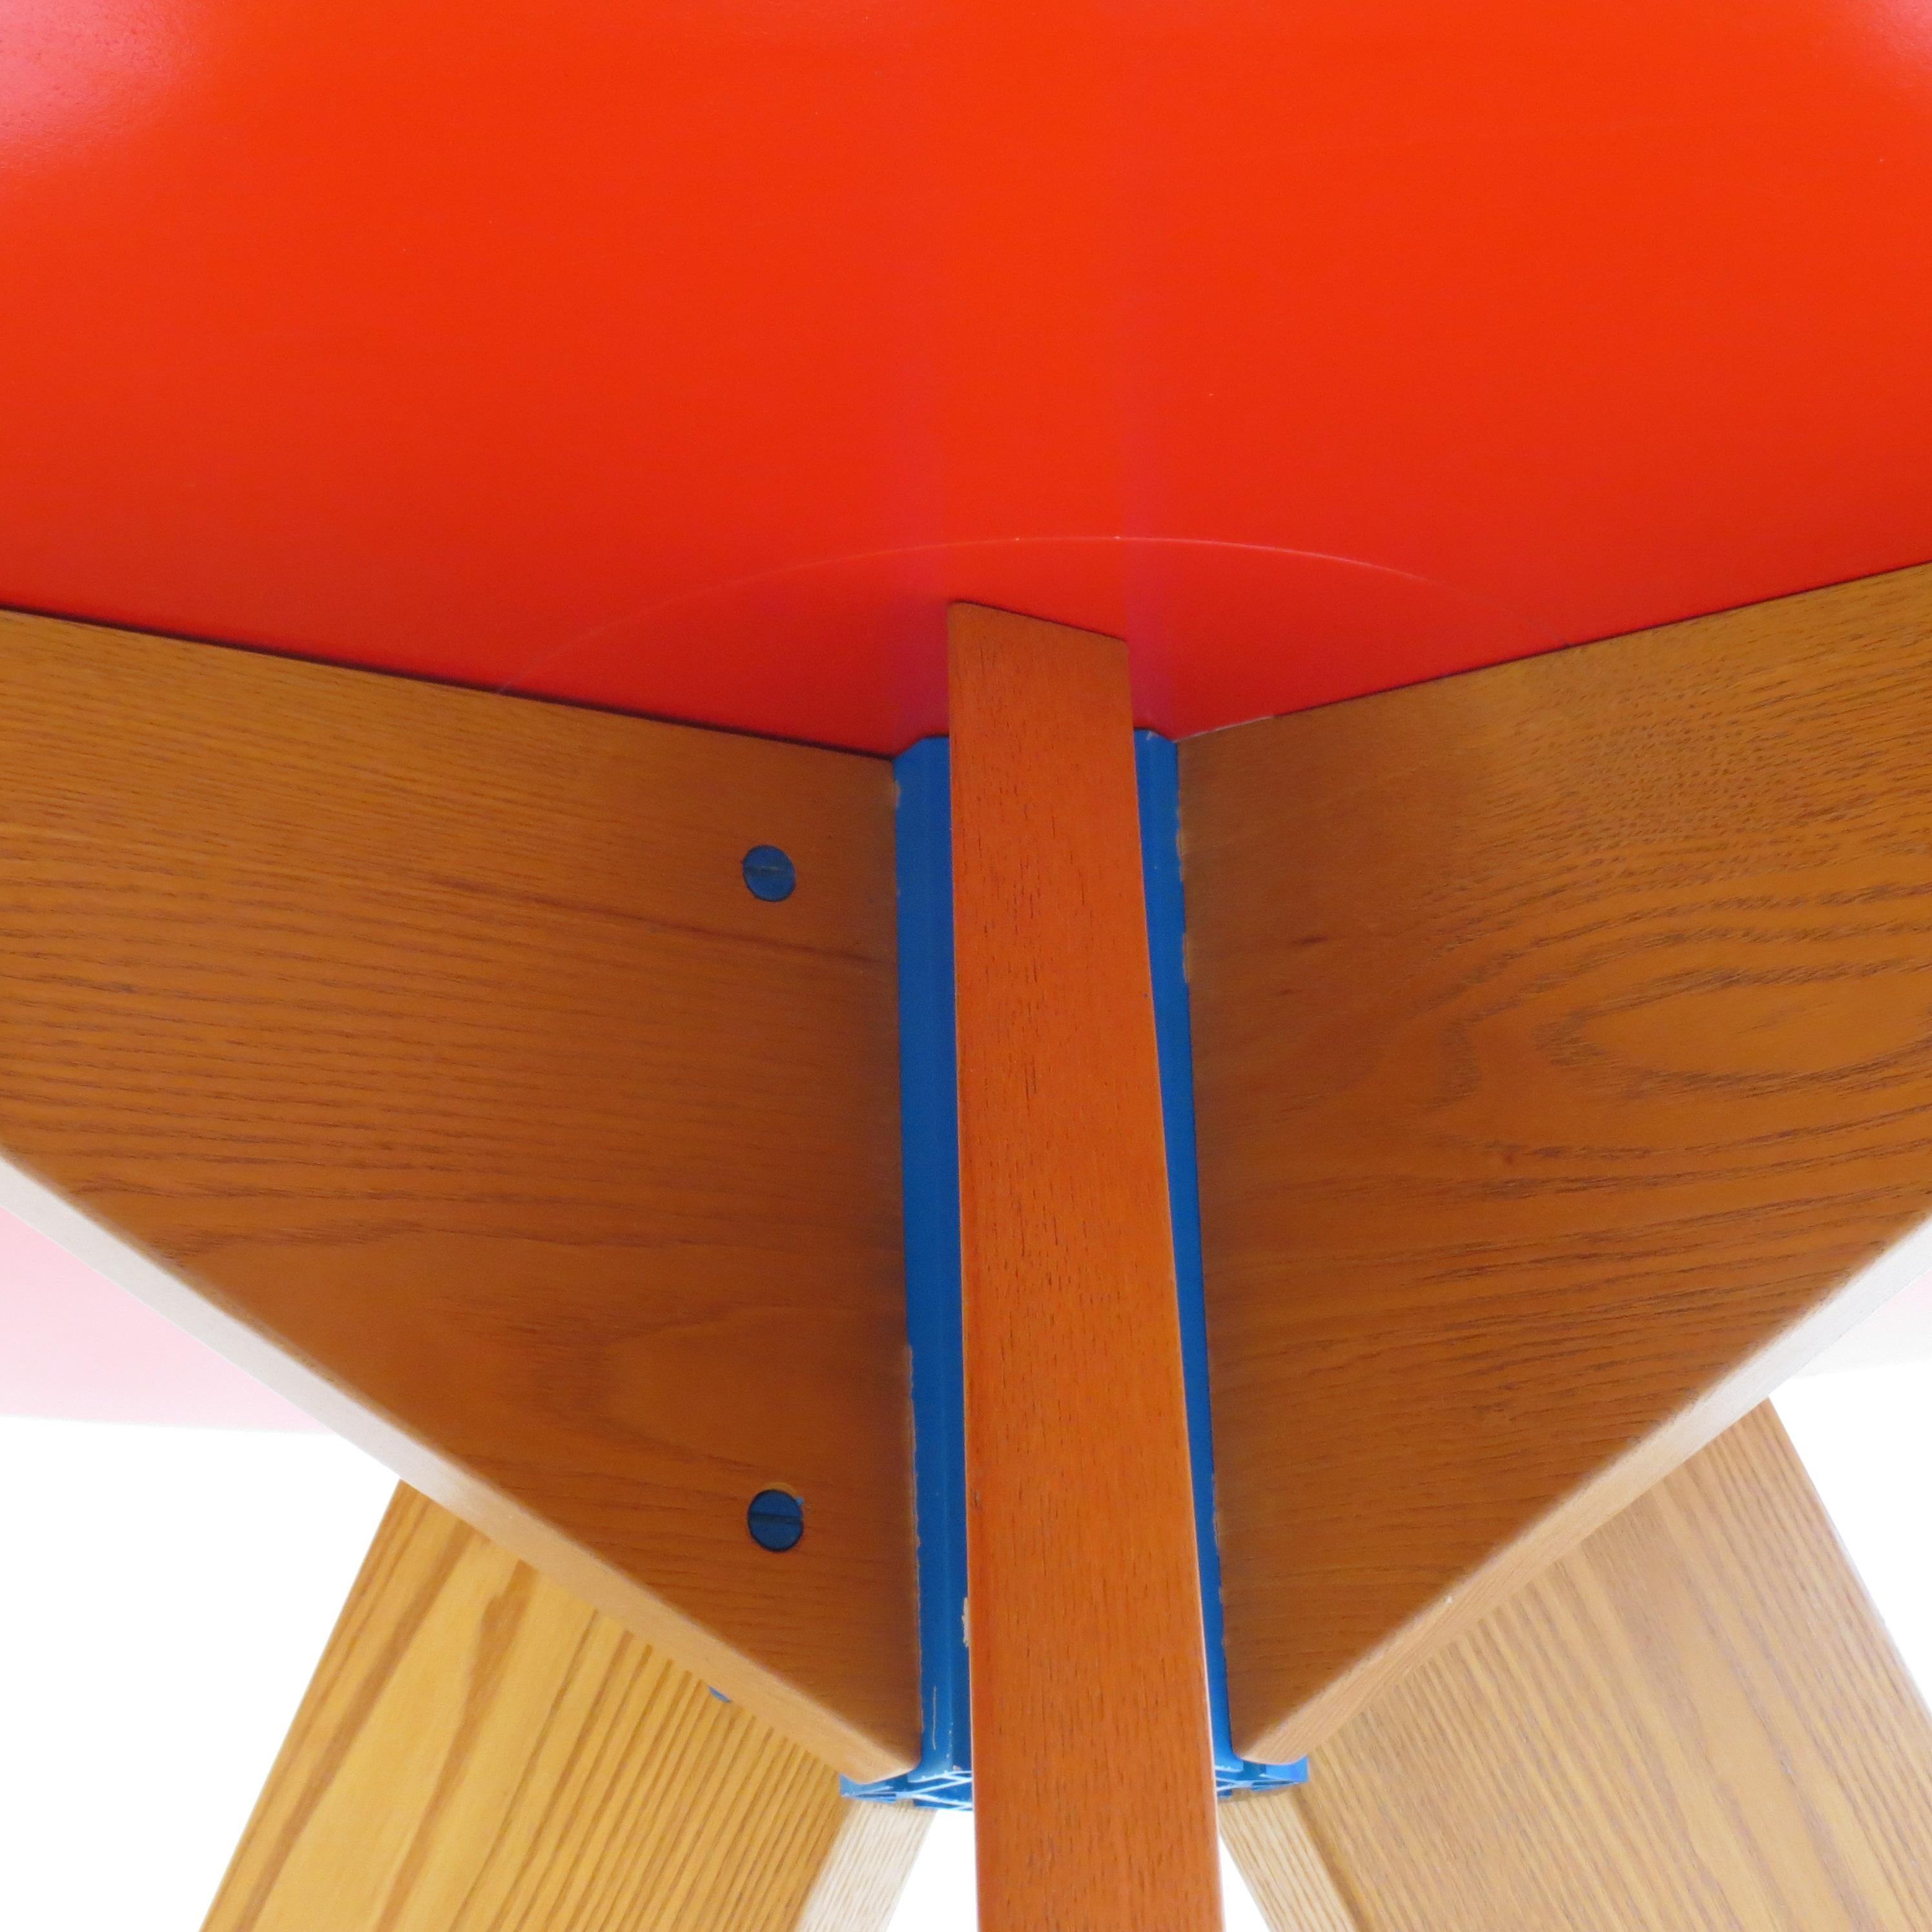 English Midcentury Bespoke Round Dining Table by David Field 1980s with Red and Blue Det